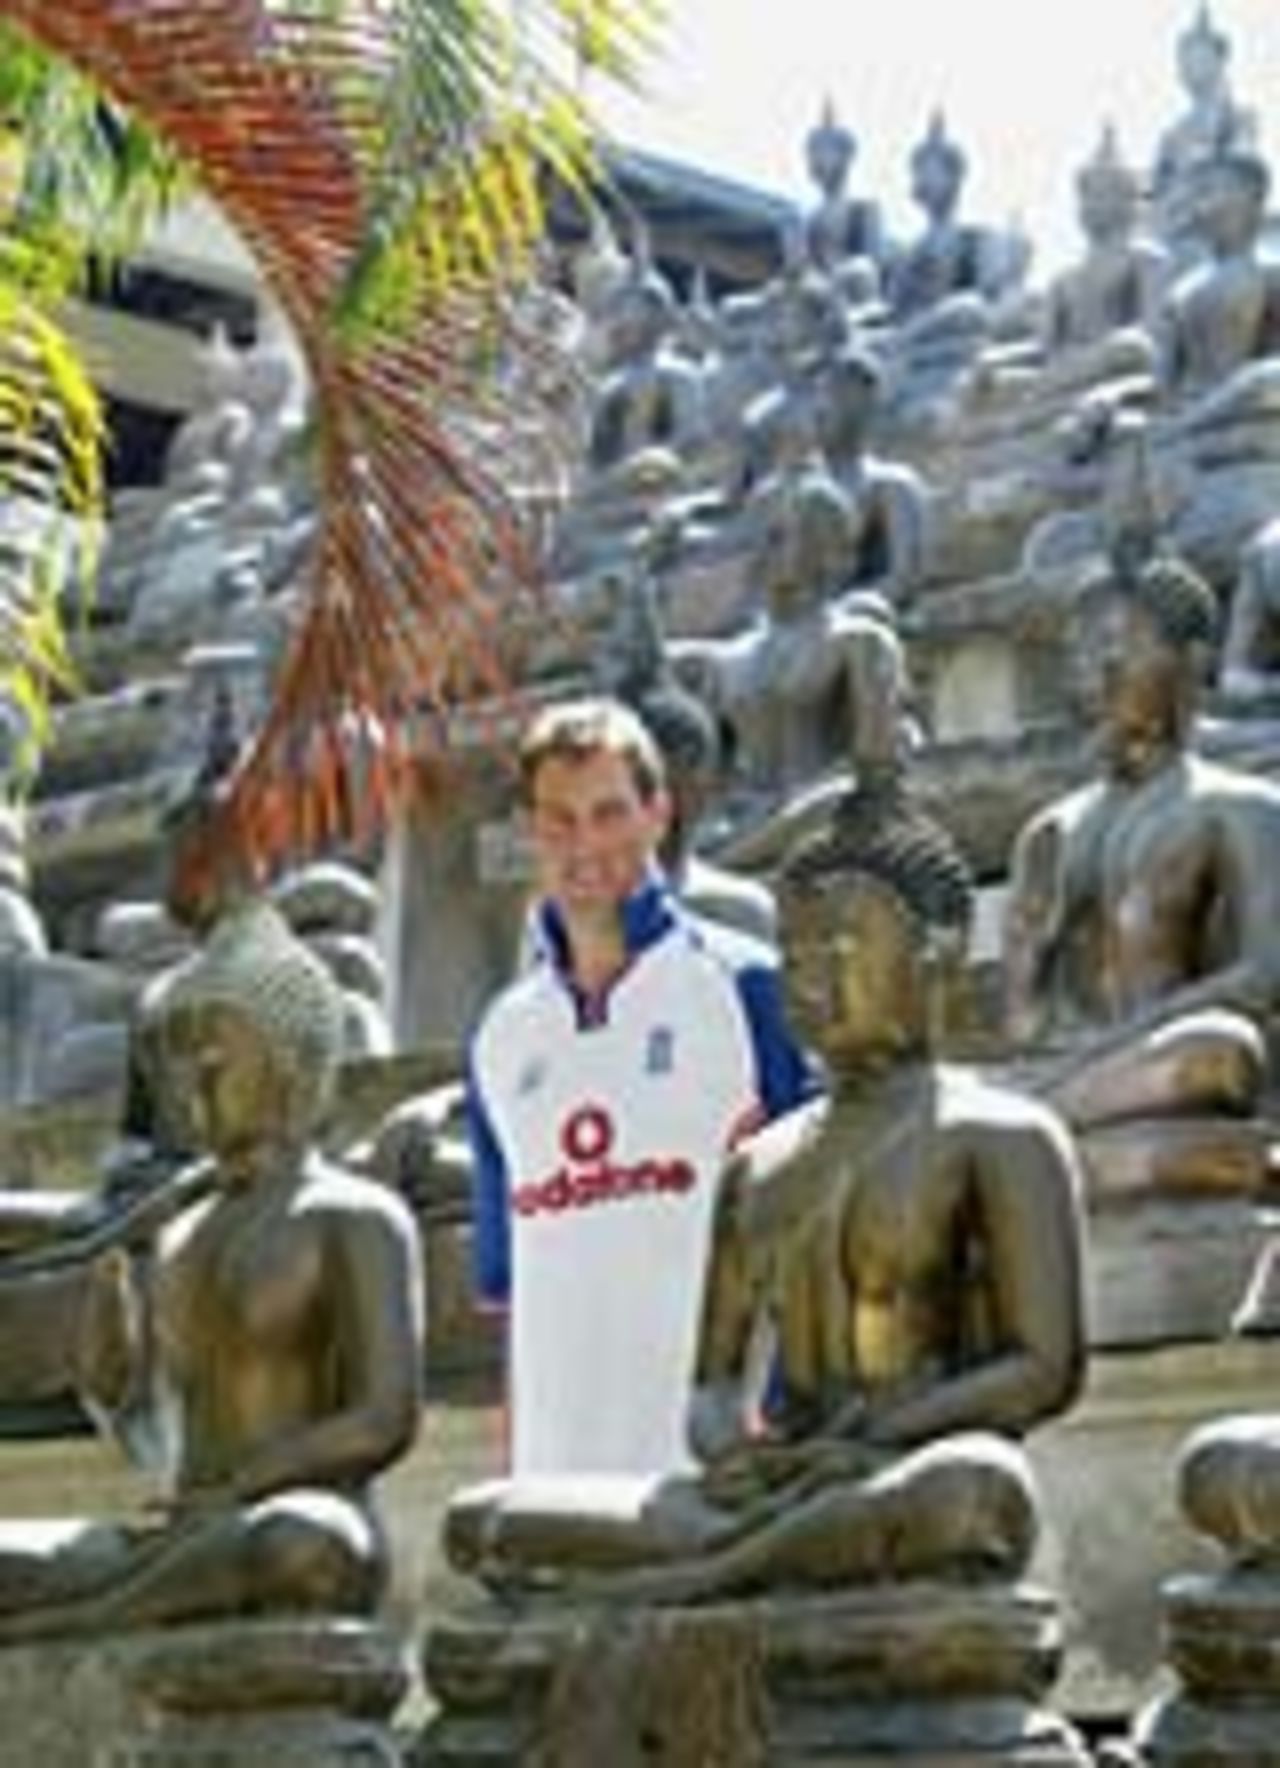 Marcus Trescothick poses among Buddha statues, December 1, 2003